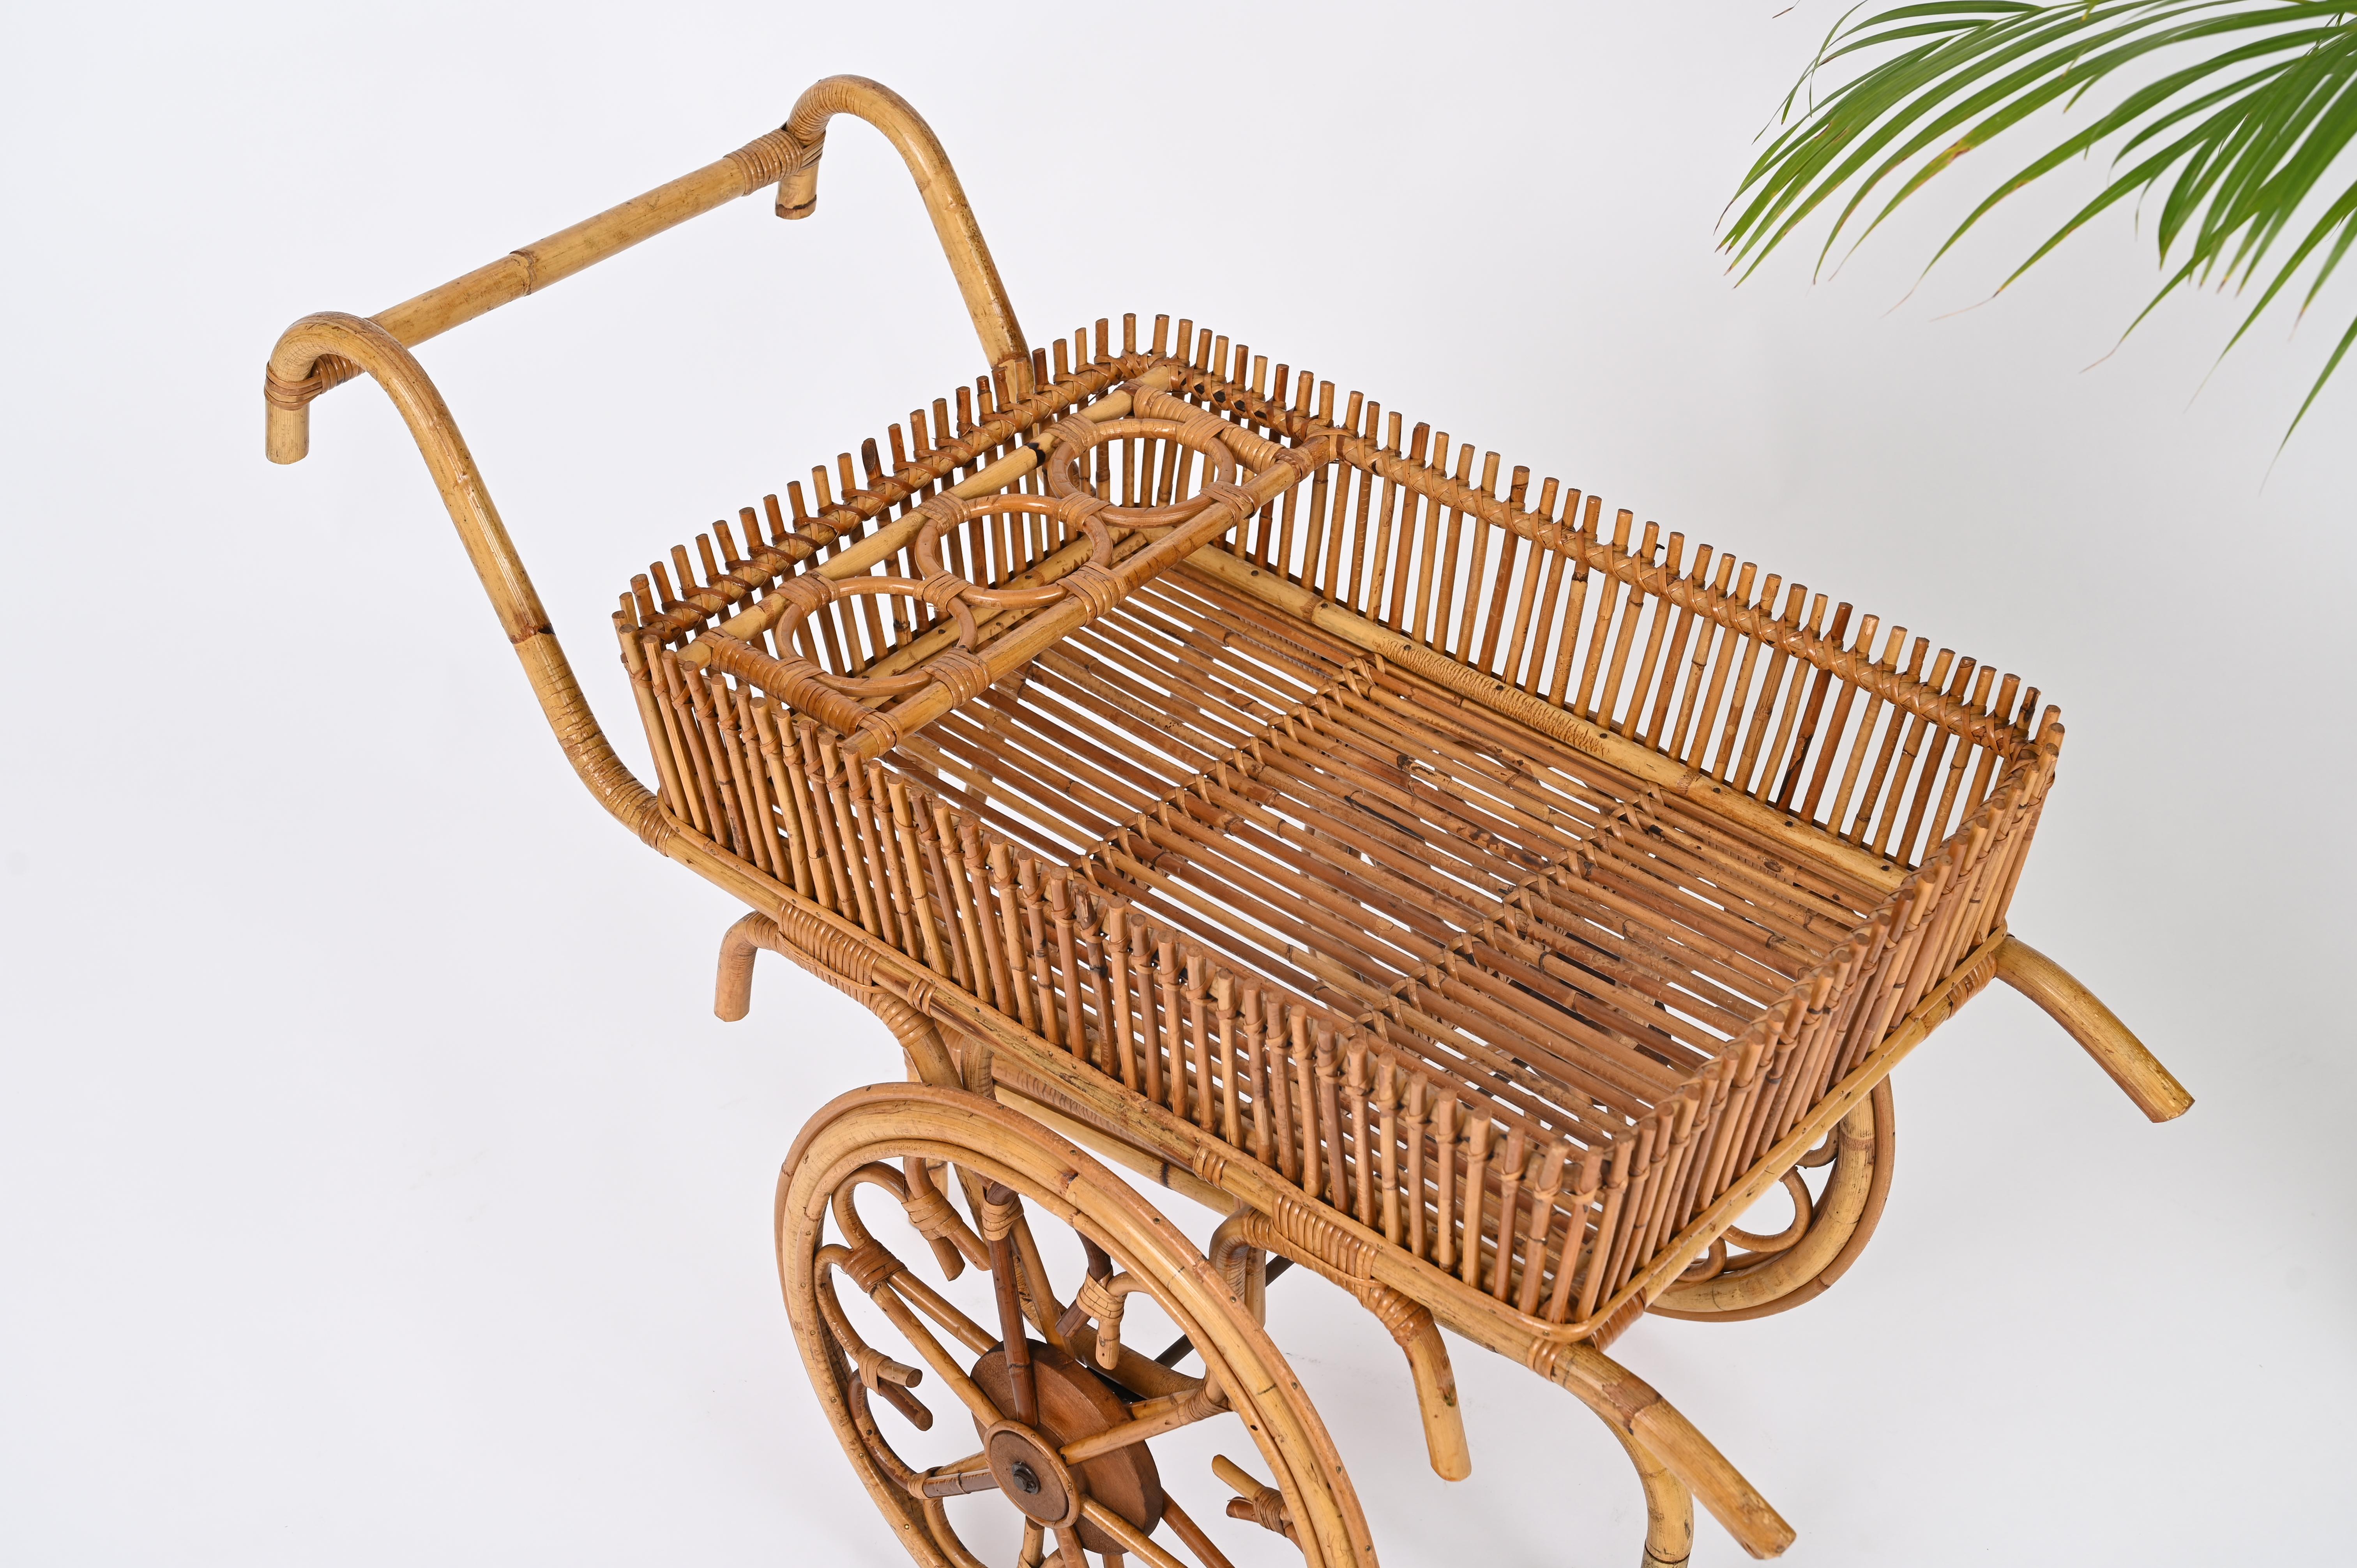 Italian French Riviera Mid-Century Bar Cart in Rattan, Bamboo and Wicker, Italy 1960s For Sale